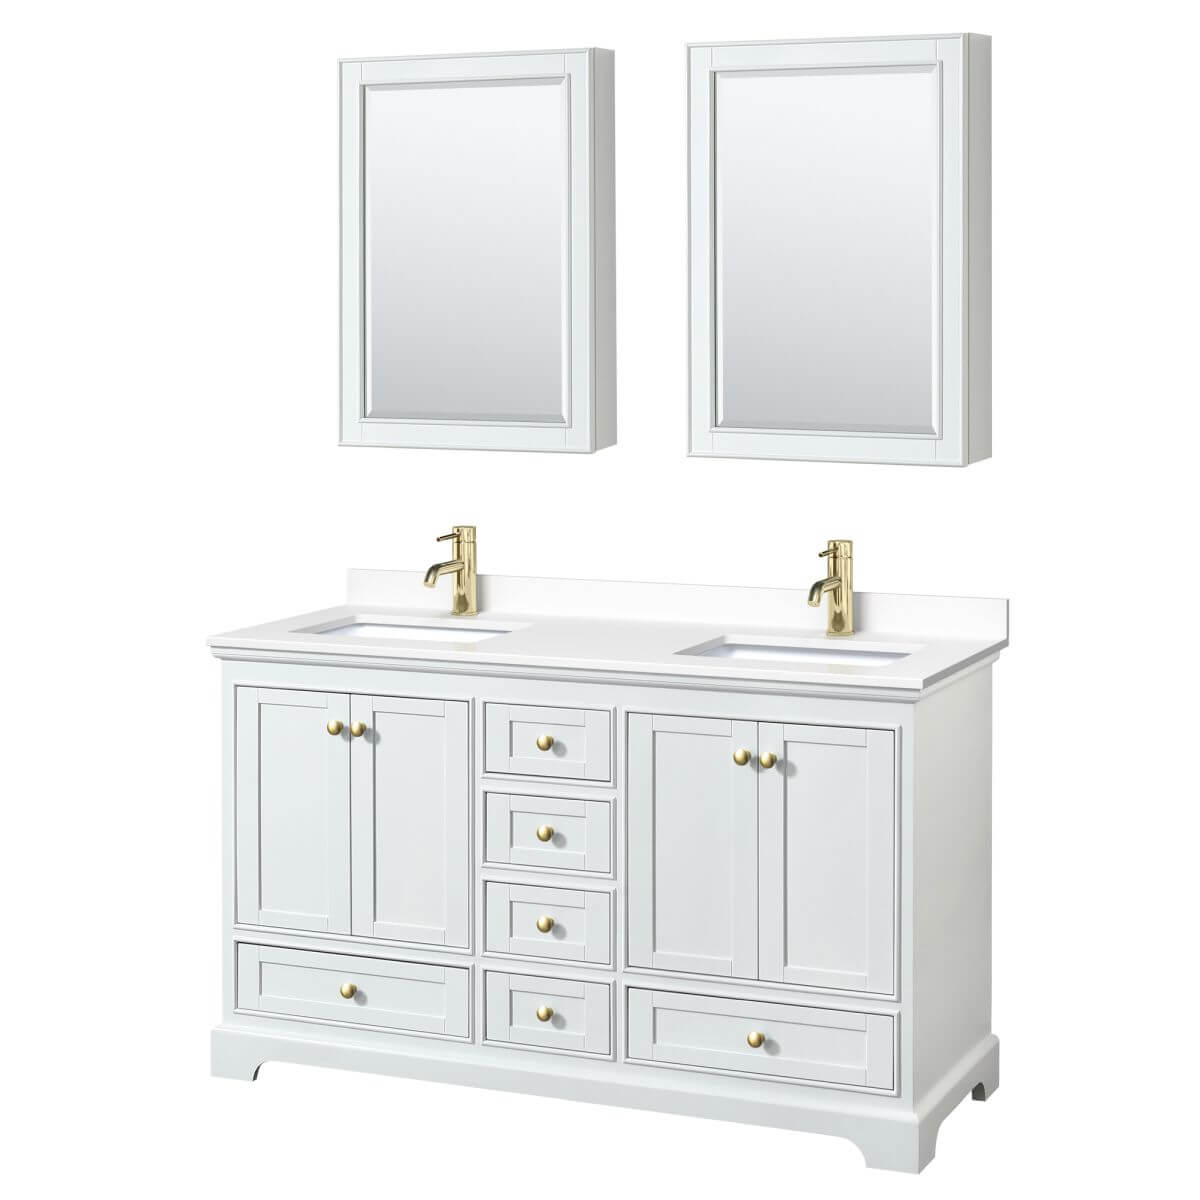 Wyndham Collection Deborah 60 inch Double Bathroom Vanity in White with White Cultured Marble Countertop, Undermount Square Sinks, Brushed Gold Trim and Medicine Cabinets - WCS202060DWGWCUNSMED